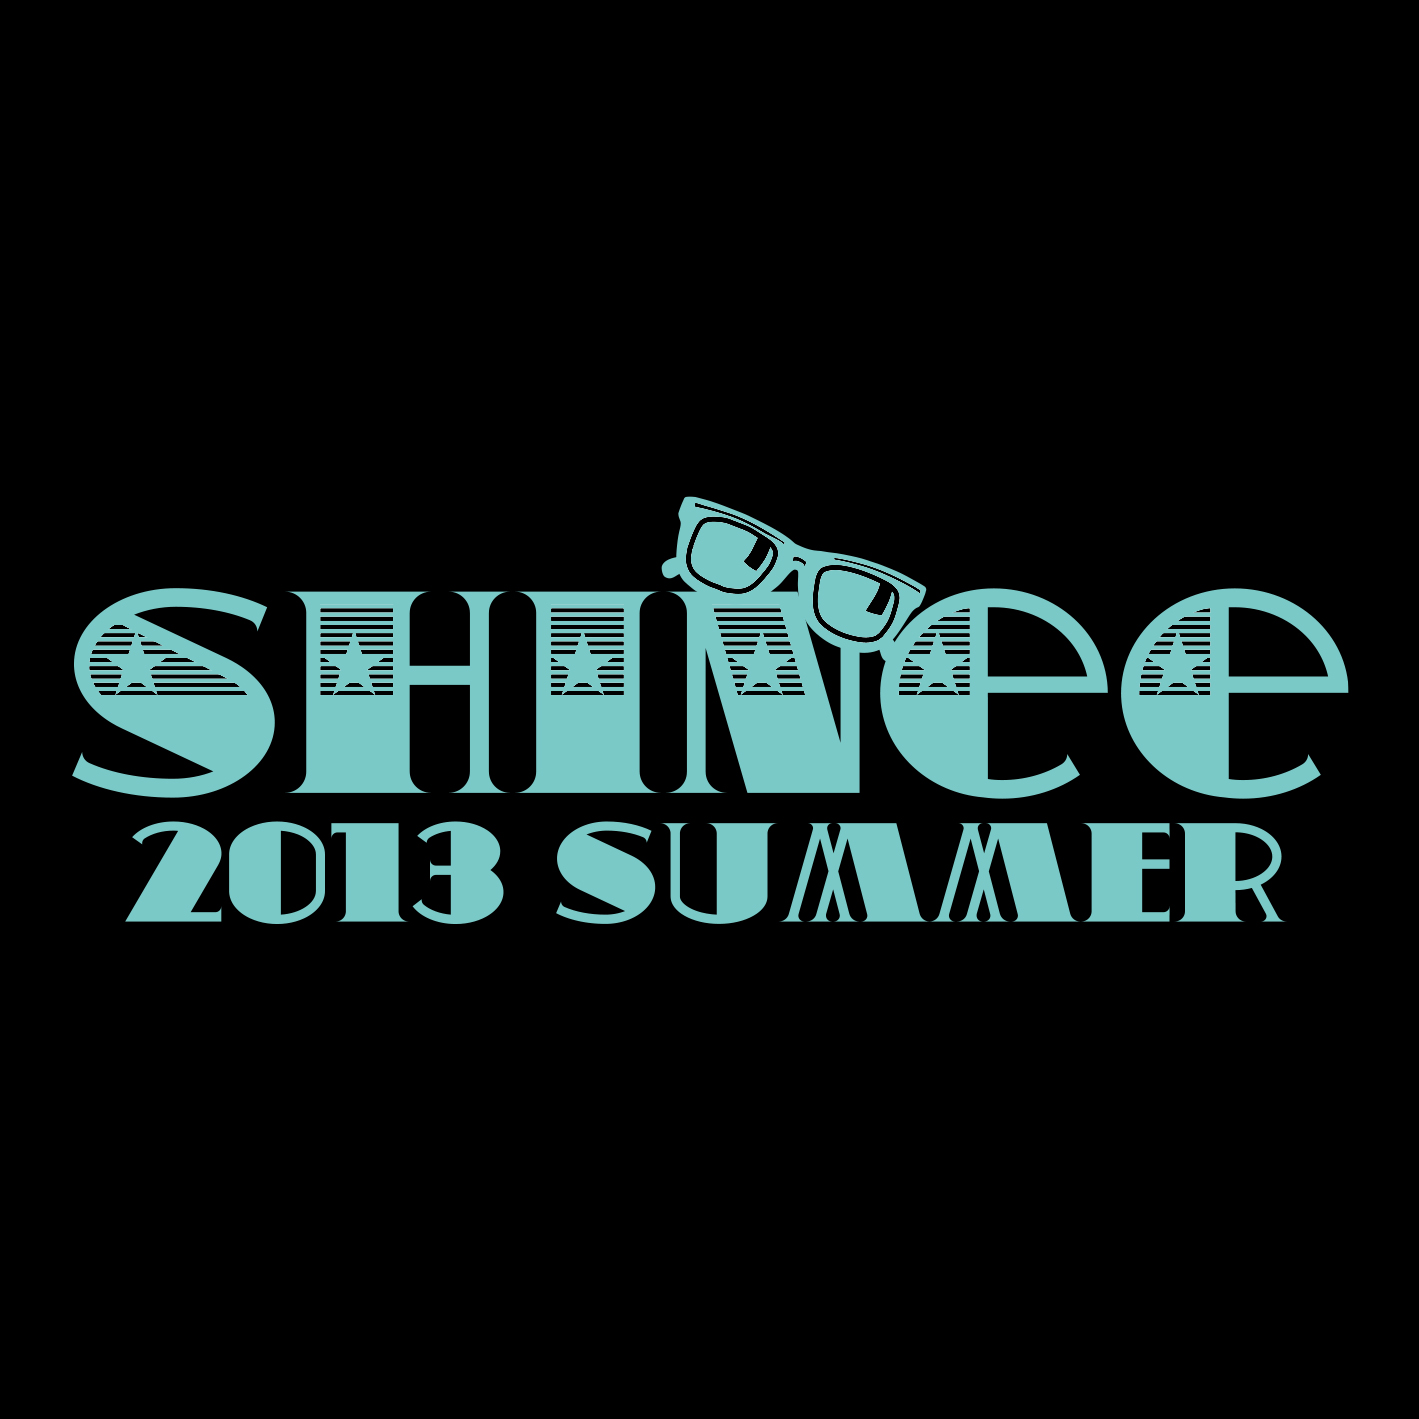 SHINee「a-nation stadium fes.2013 powered by ウイダーinゼリー」LOGO